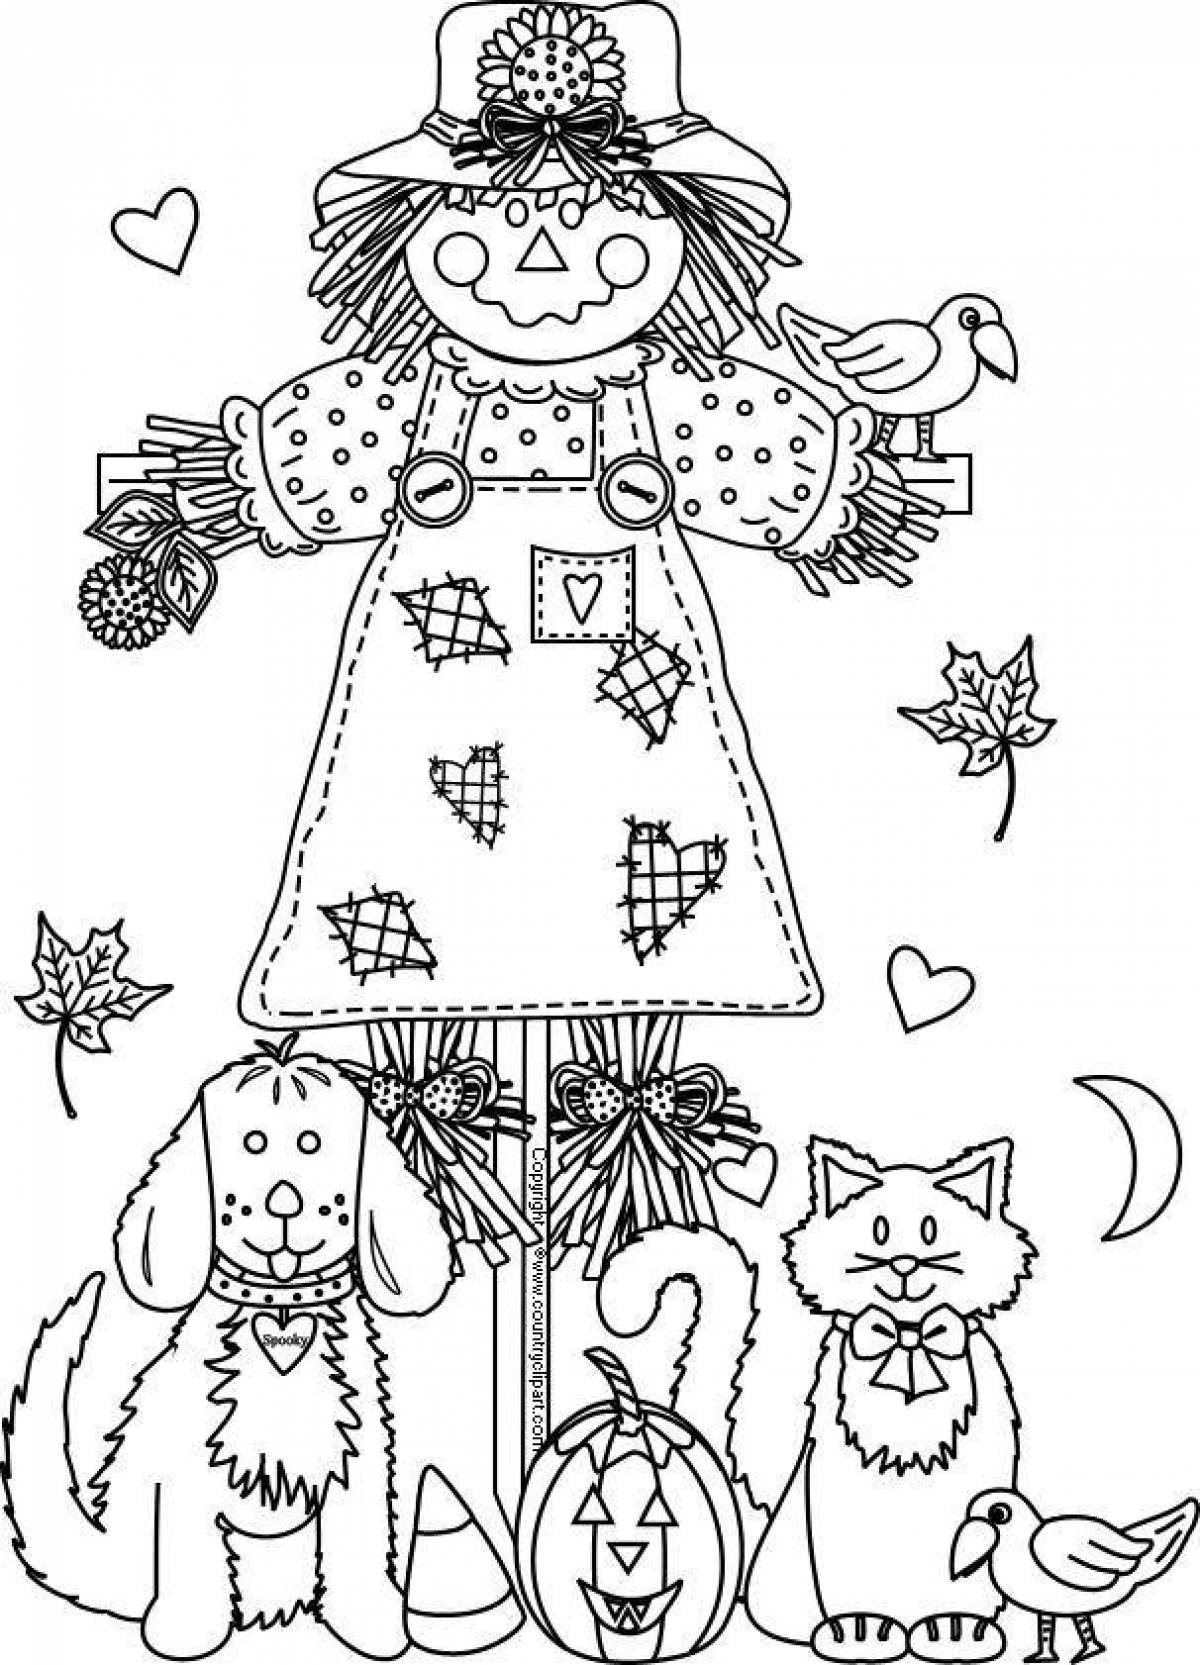 Exciting scarecrow carnival coloring book